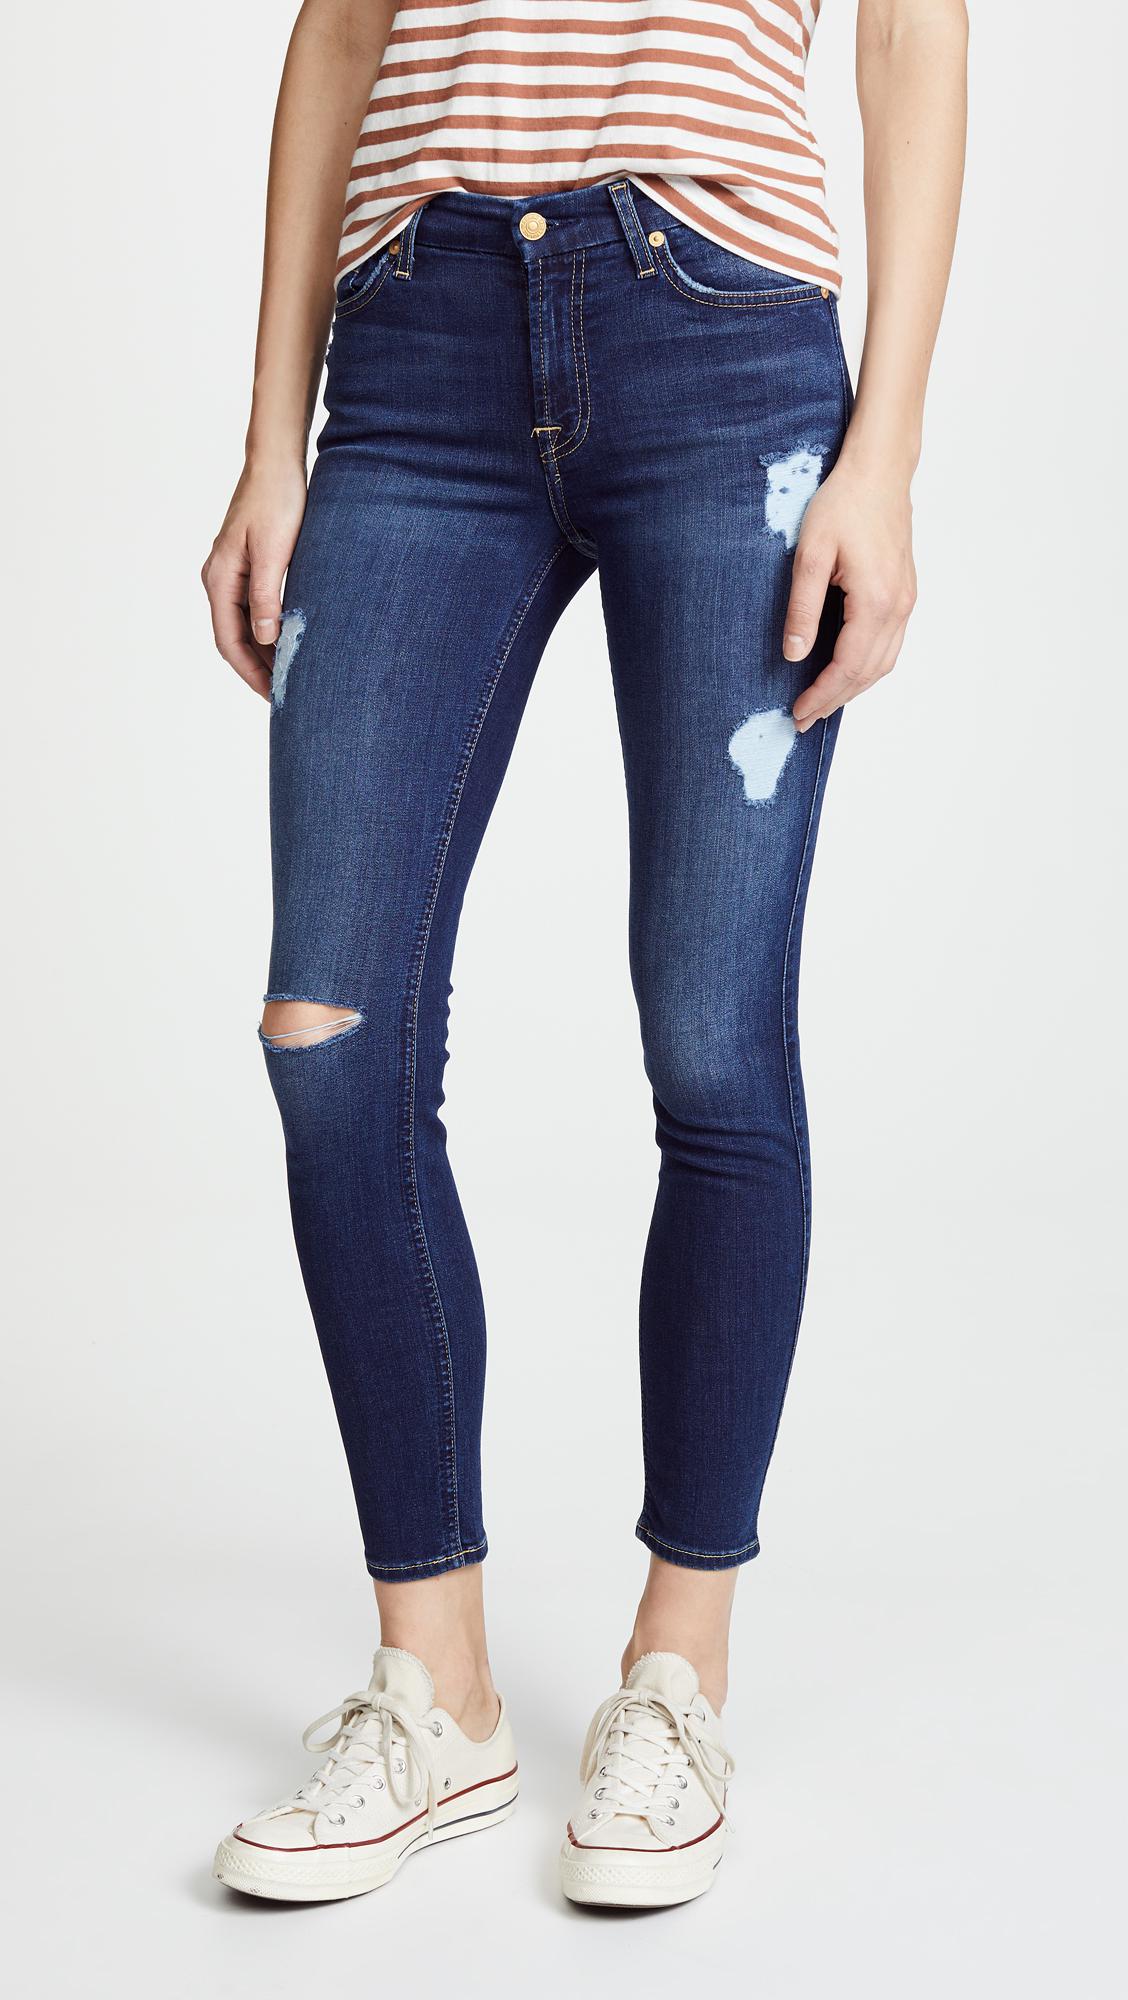 Lyst - 7 For All Mankind B(air) Ankle Skinny Jeans in Blue - Save 30.